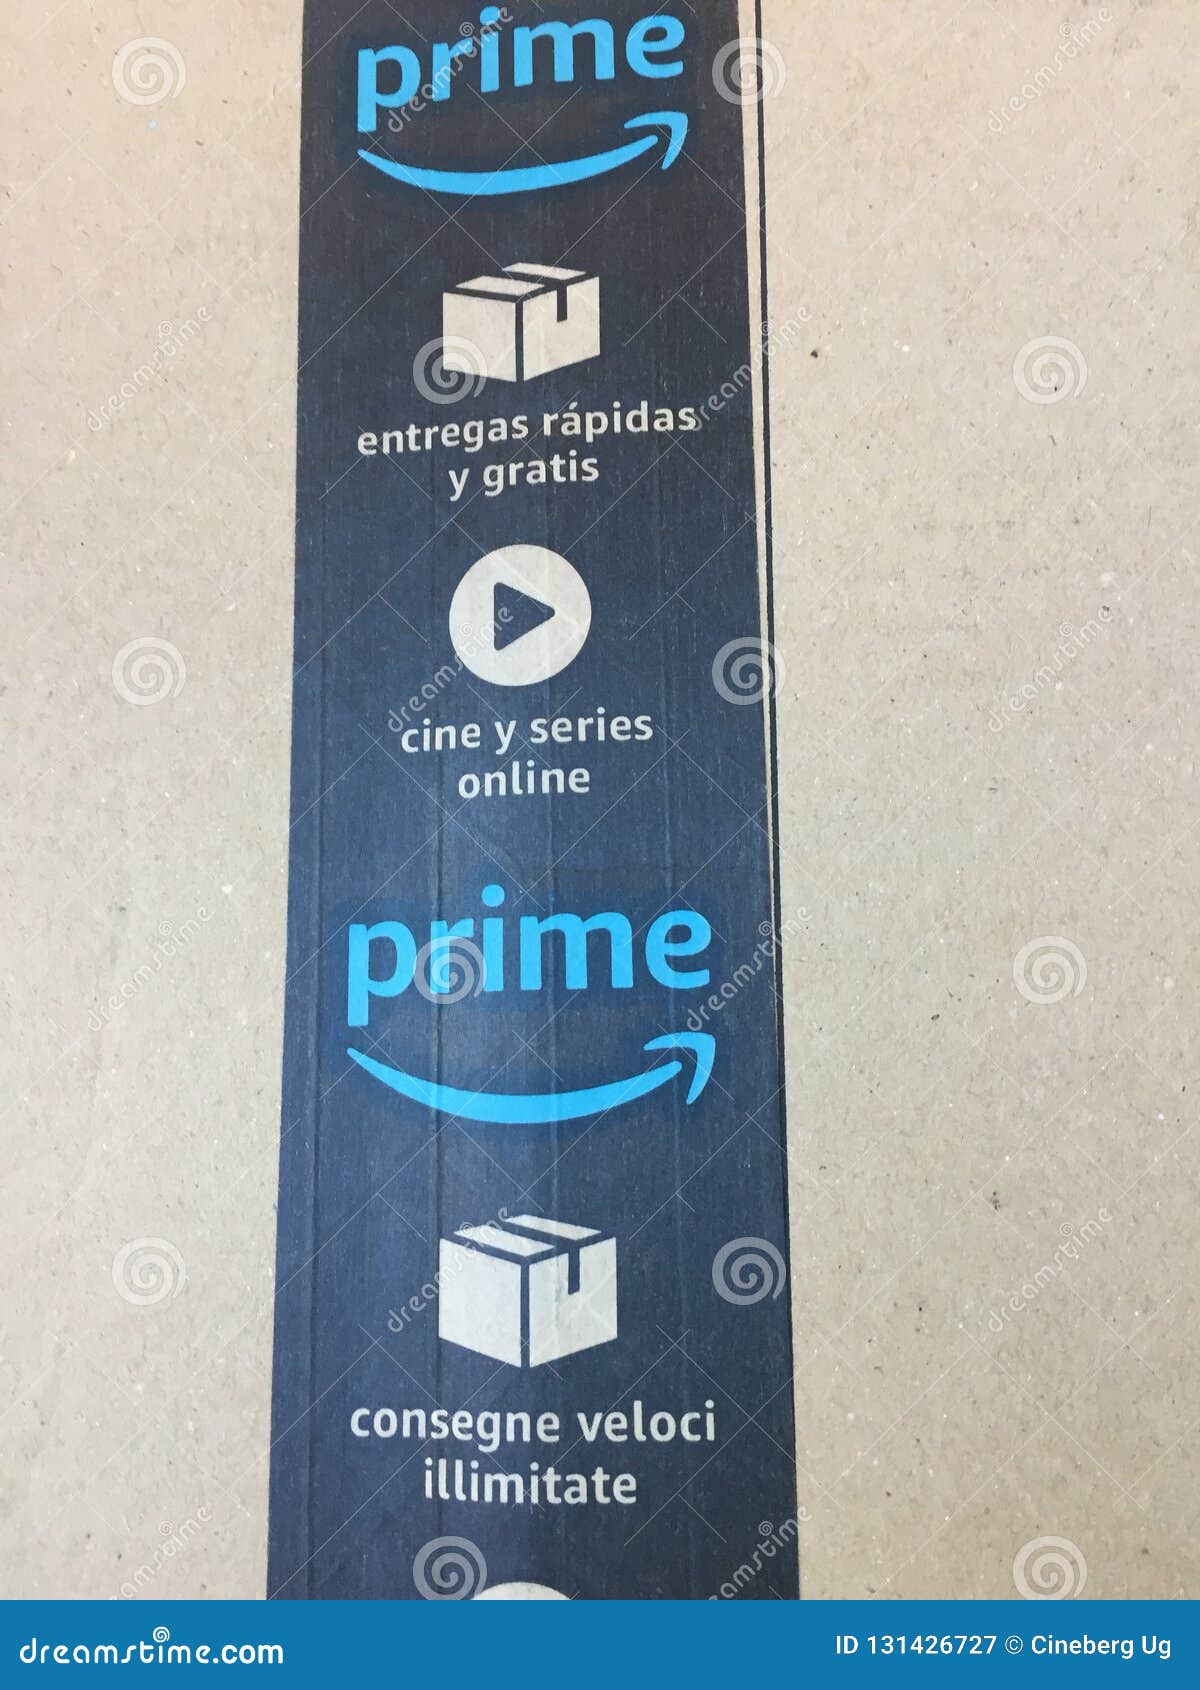 https://thumbs.dreamstime.com/z/amazon-prime-boxes-berlin-germany-october-cardboard-online-retailer-shipping-box-featuring-packaging-tape-yearly-fee-131426727.jpg